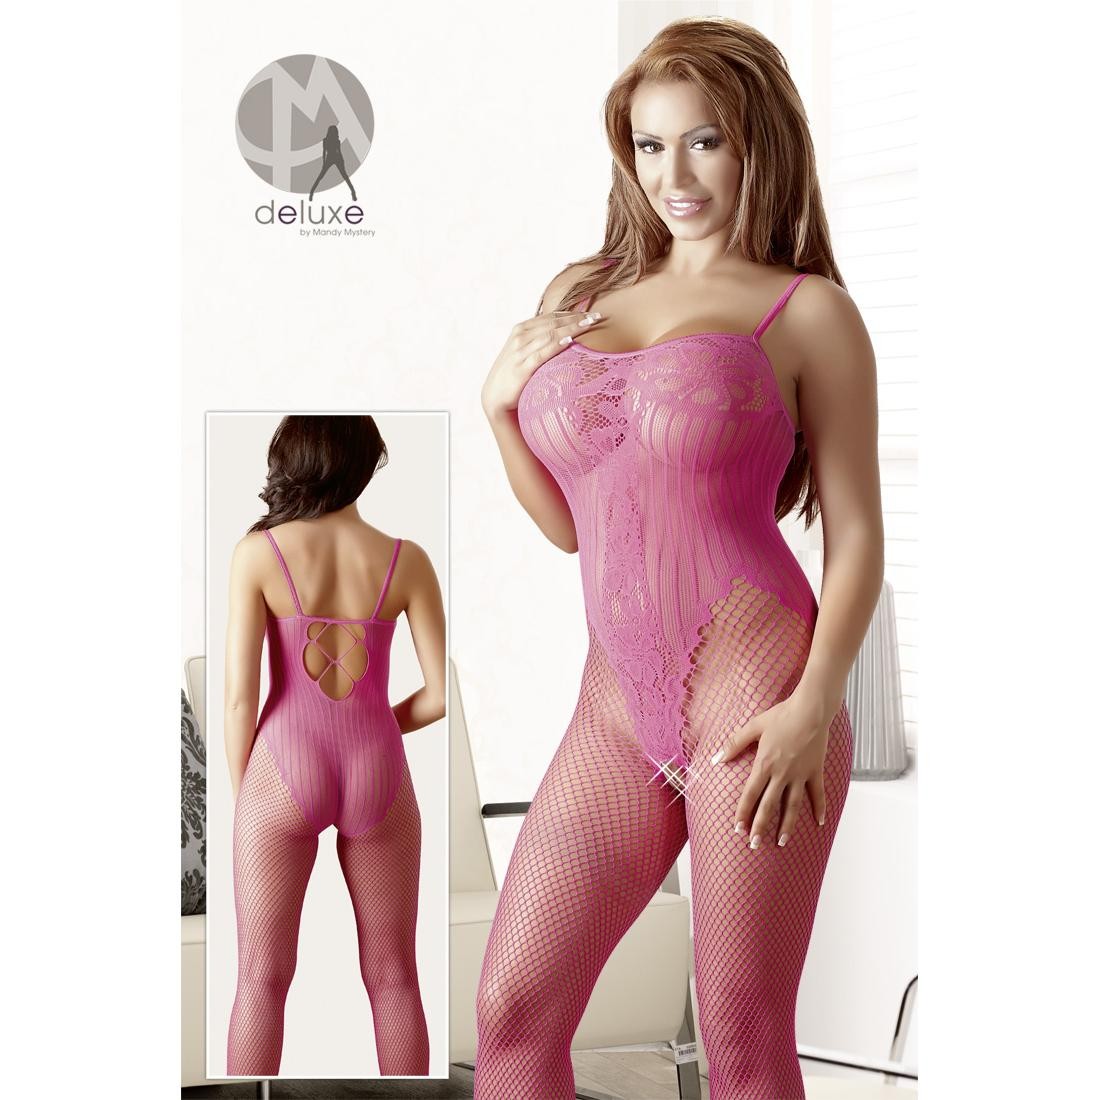  Mandy  Mystery  Deluxe  -  Grobnetz  Catsuit  ouvert  -  pink 